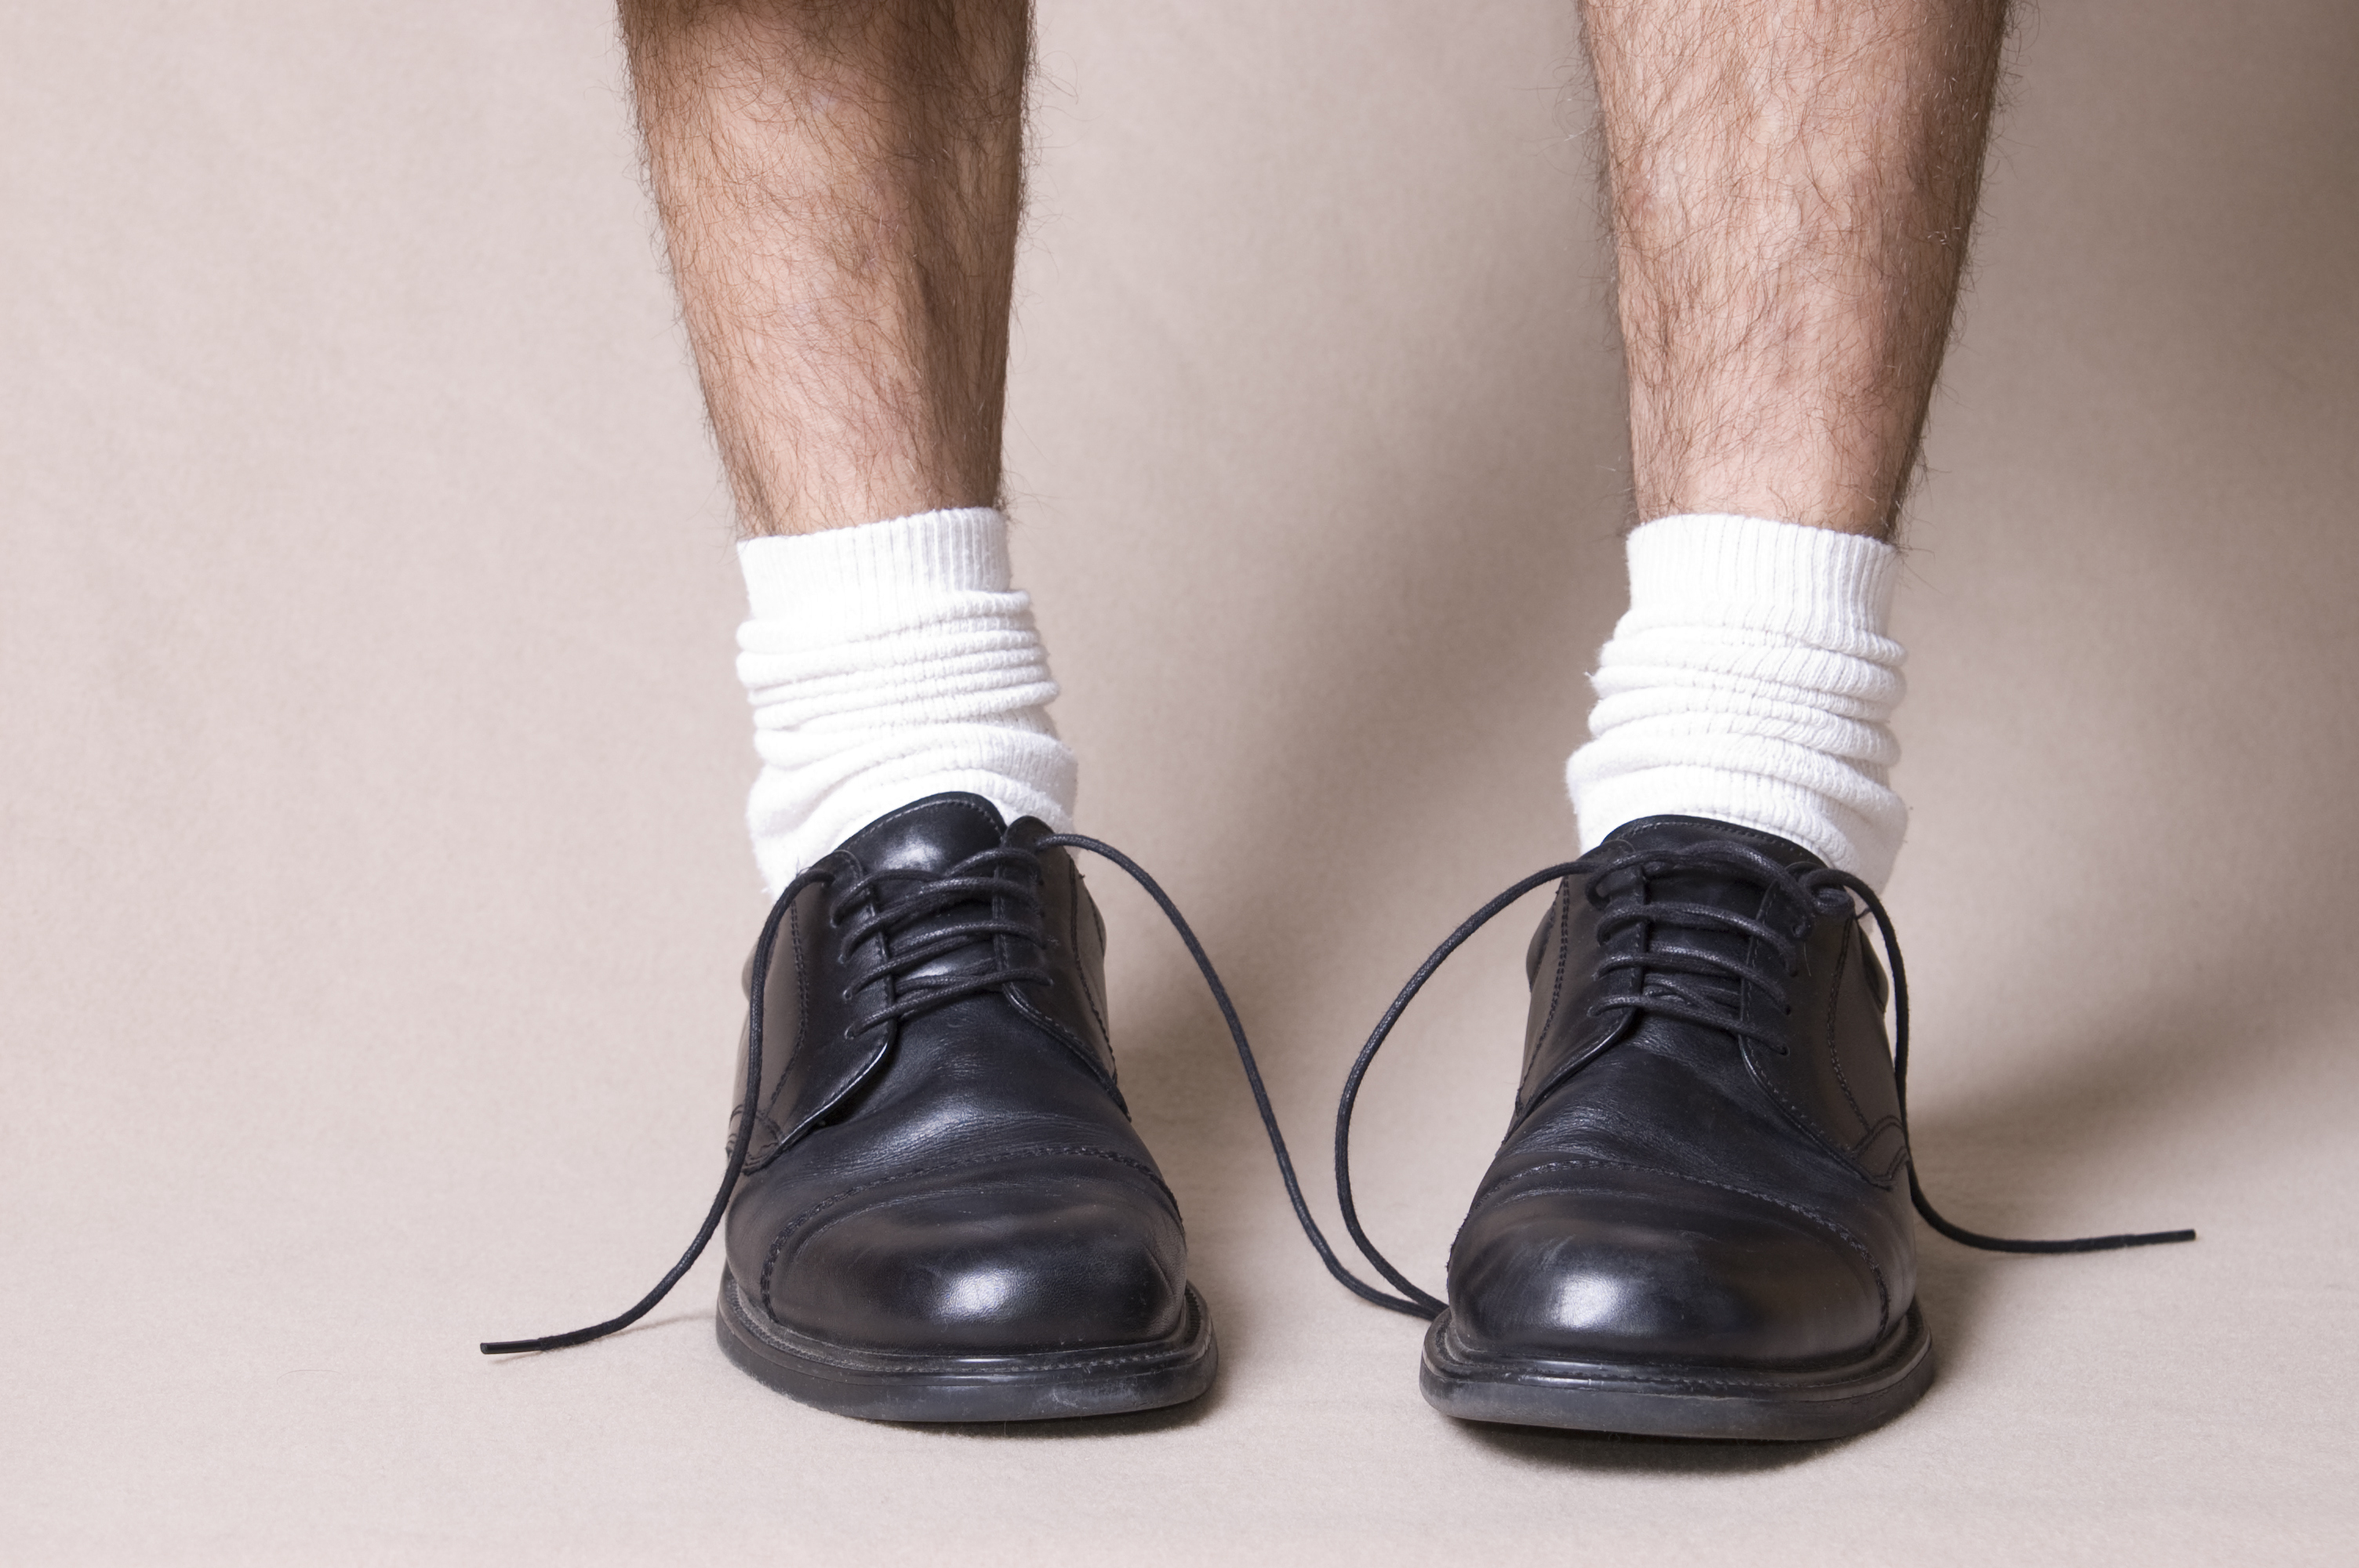 Close-up of a person&#x27;s legs wearing white socks and black dress shoes with untied laces. The focus is on the shoes and socks, illustrating a casual or unfinished look